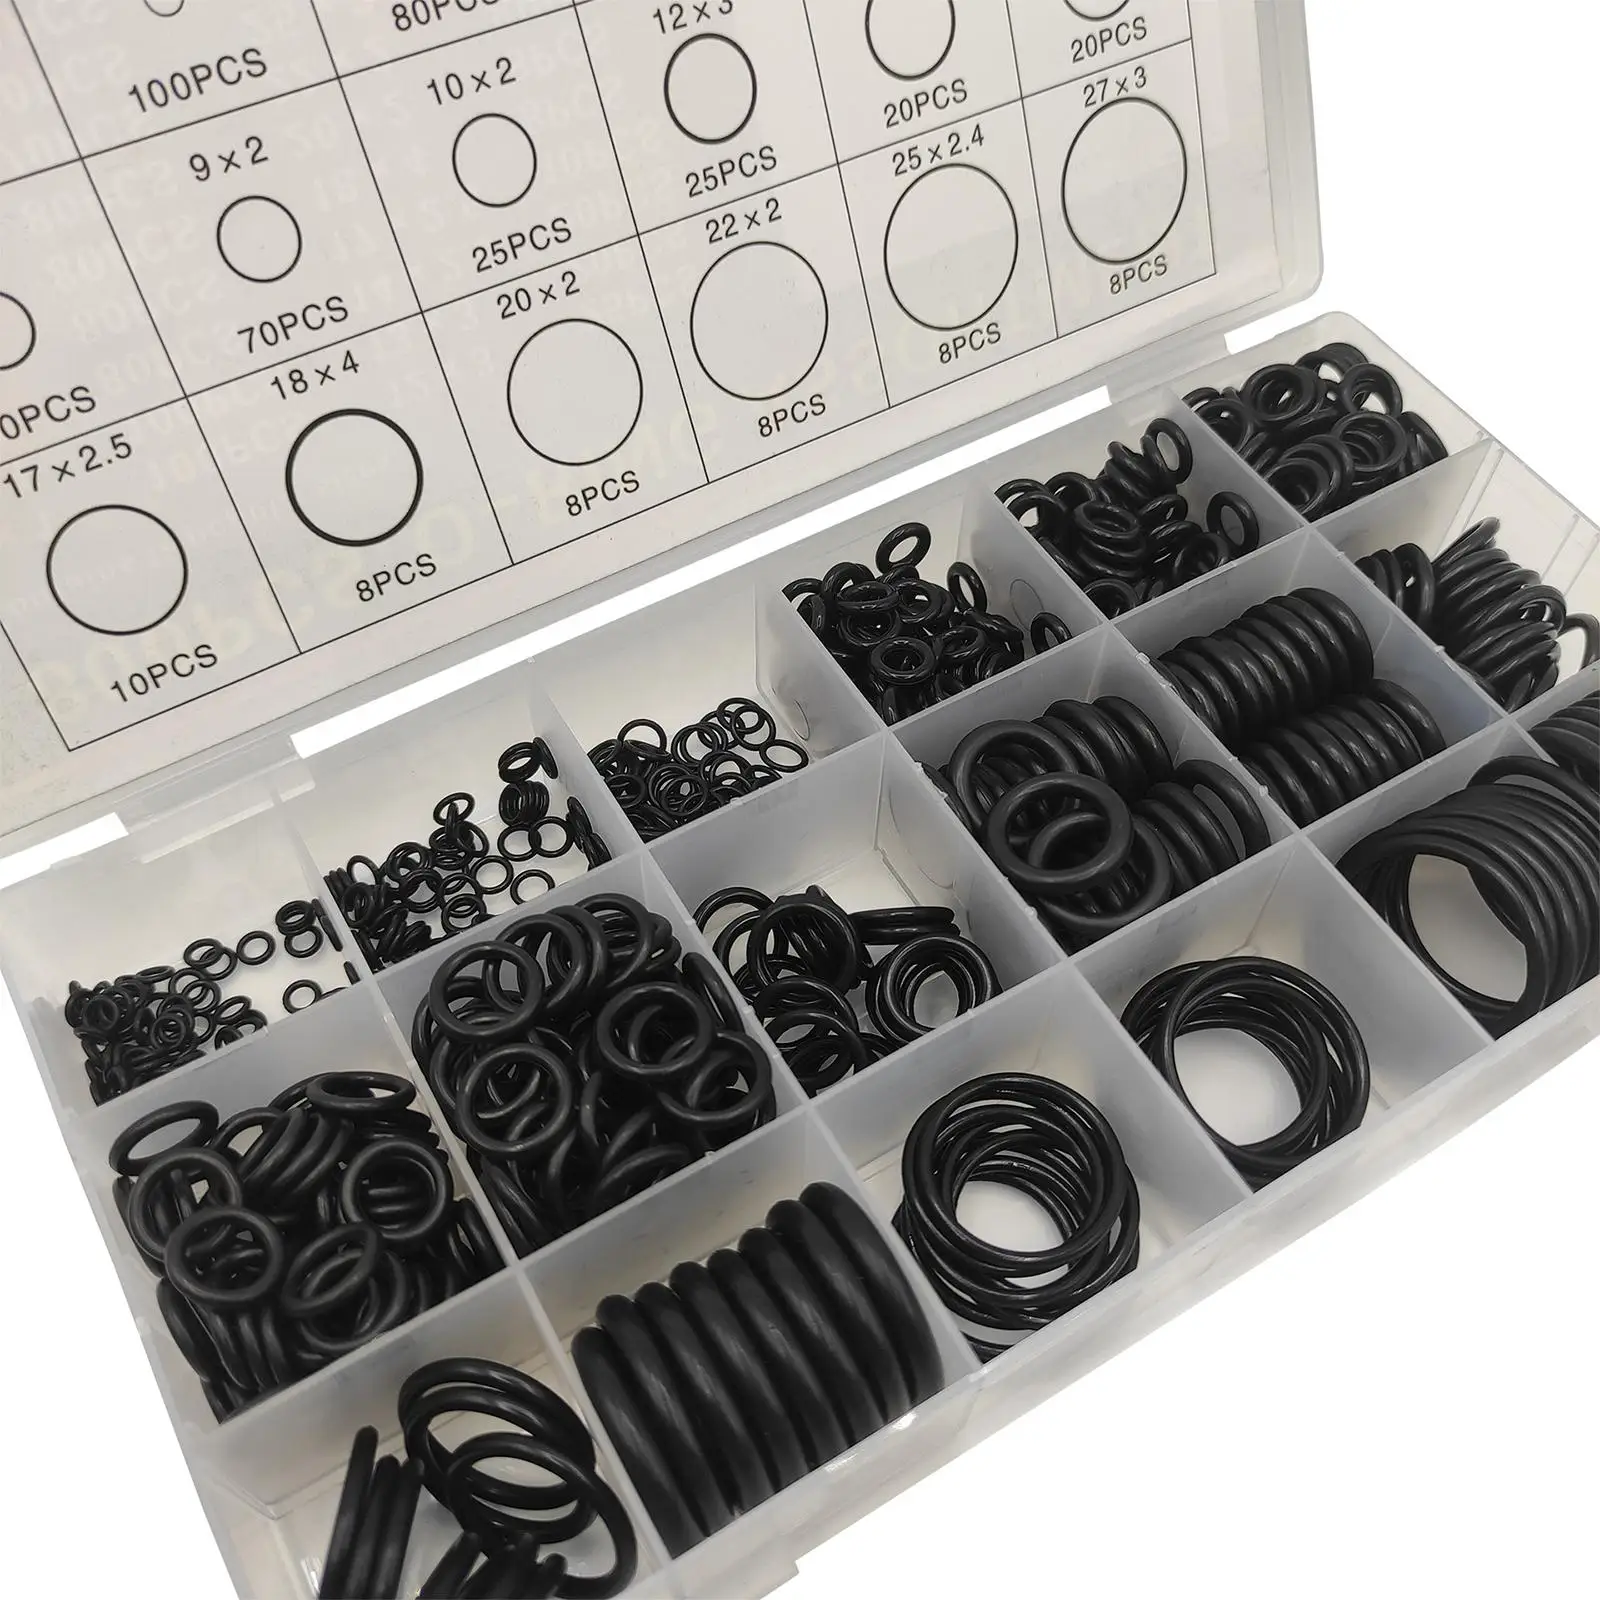 800 Pieces Rubber O Ring Assortment Kit 18 Sizes for Mechanics Workshop